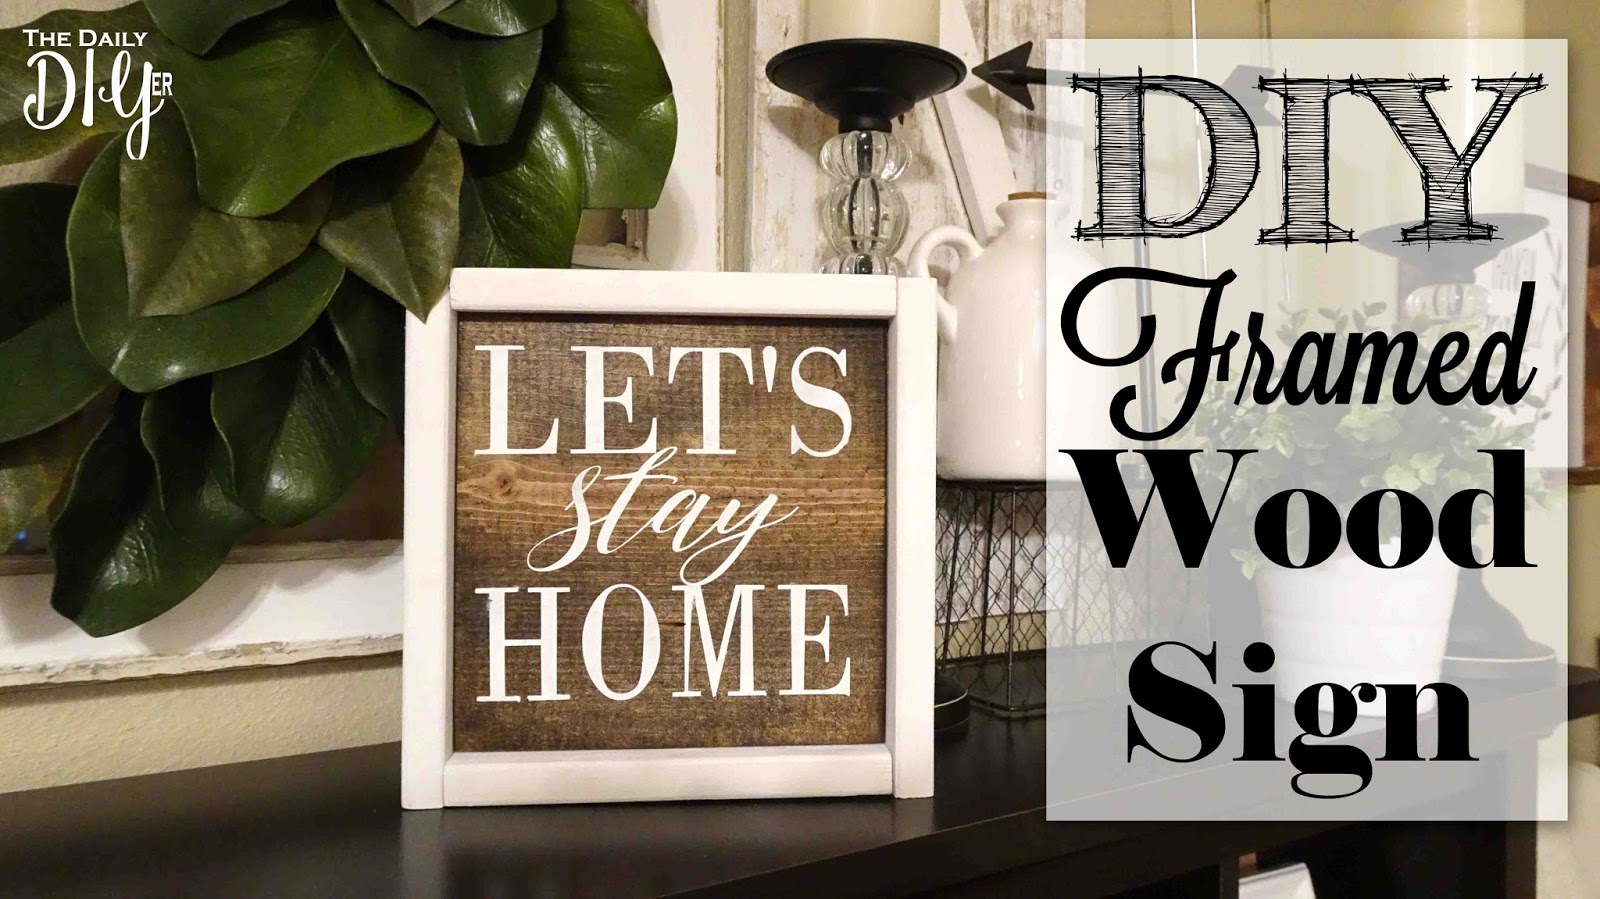 Better homes перевод. Светильник Lets stay Home. DIY frame перевод на русский. Lullaby stay Home.